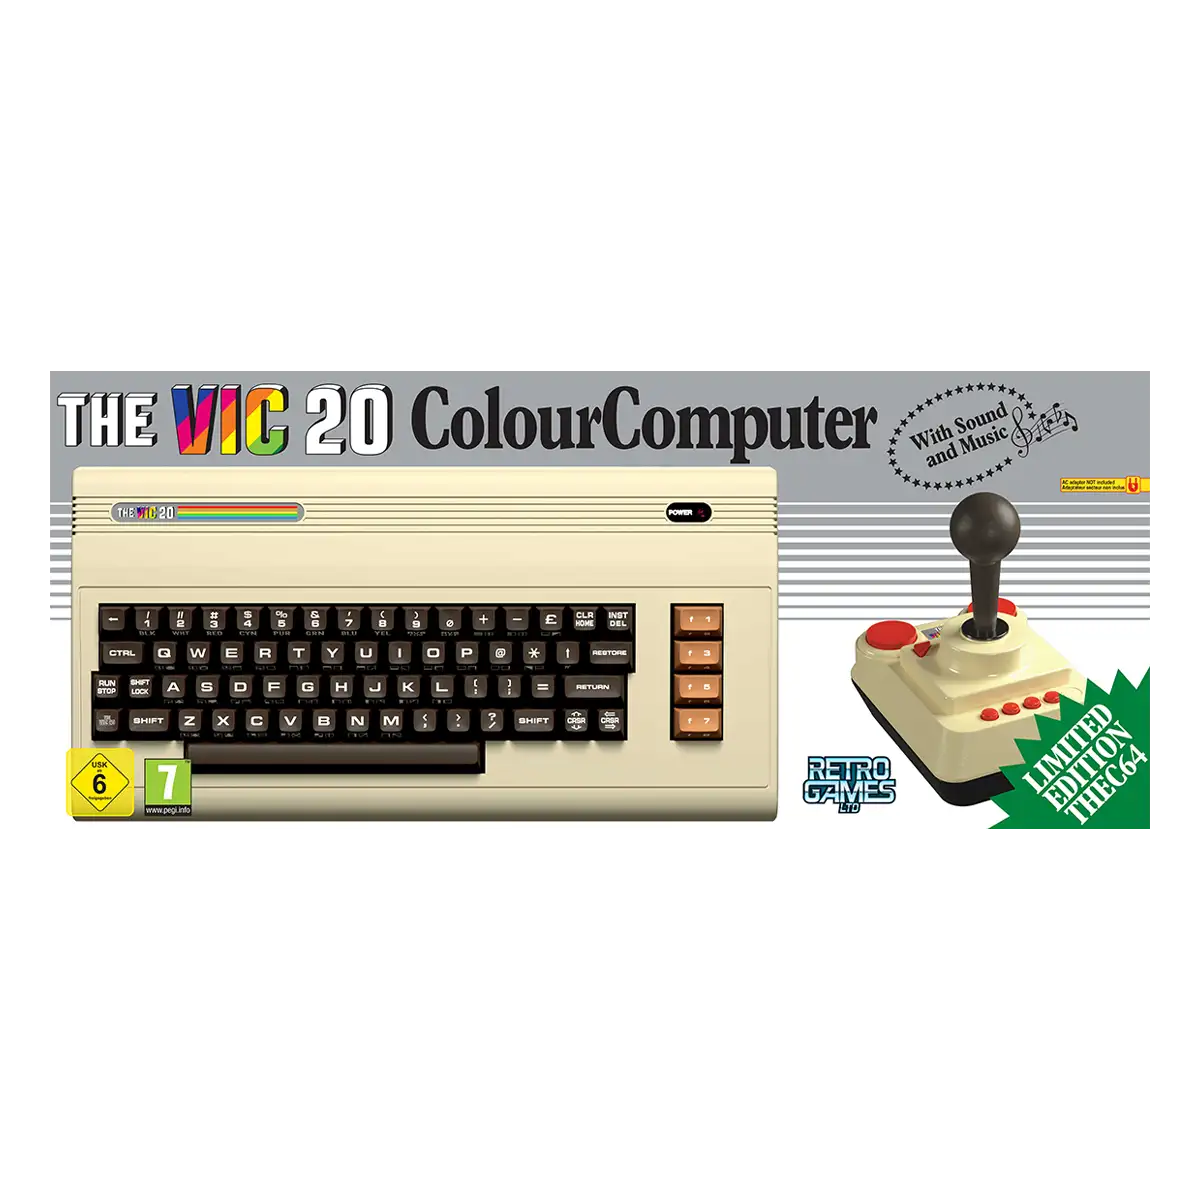 THE VIC 20 - Limited Edition C64